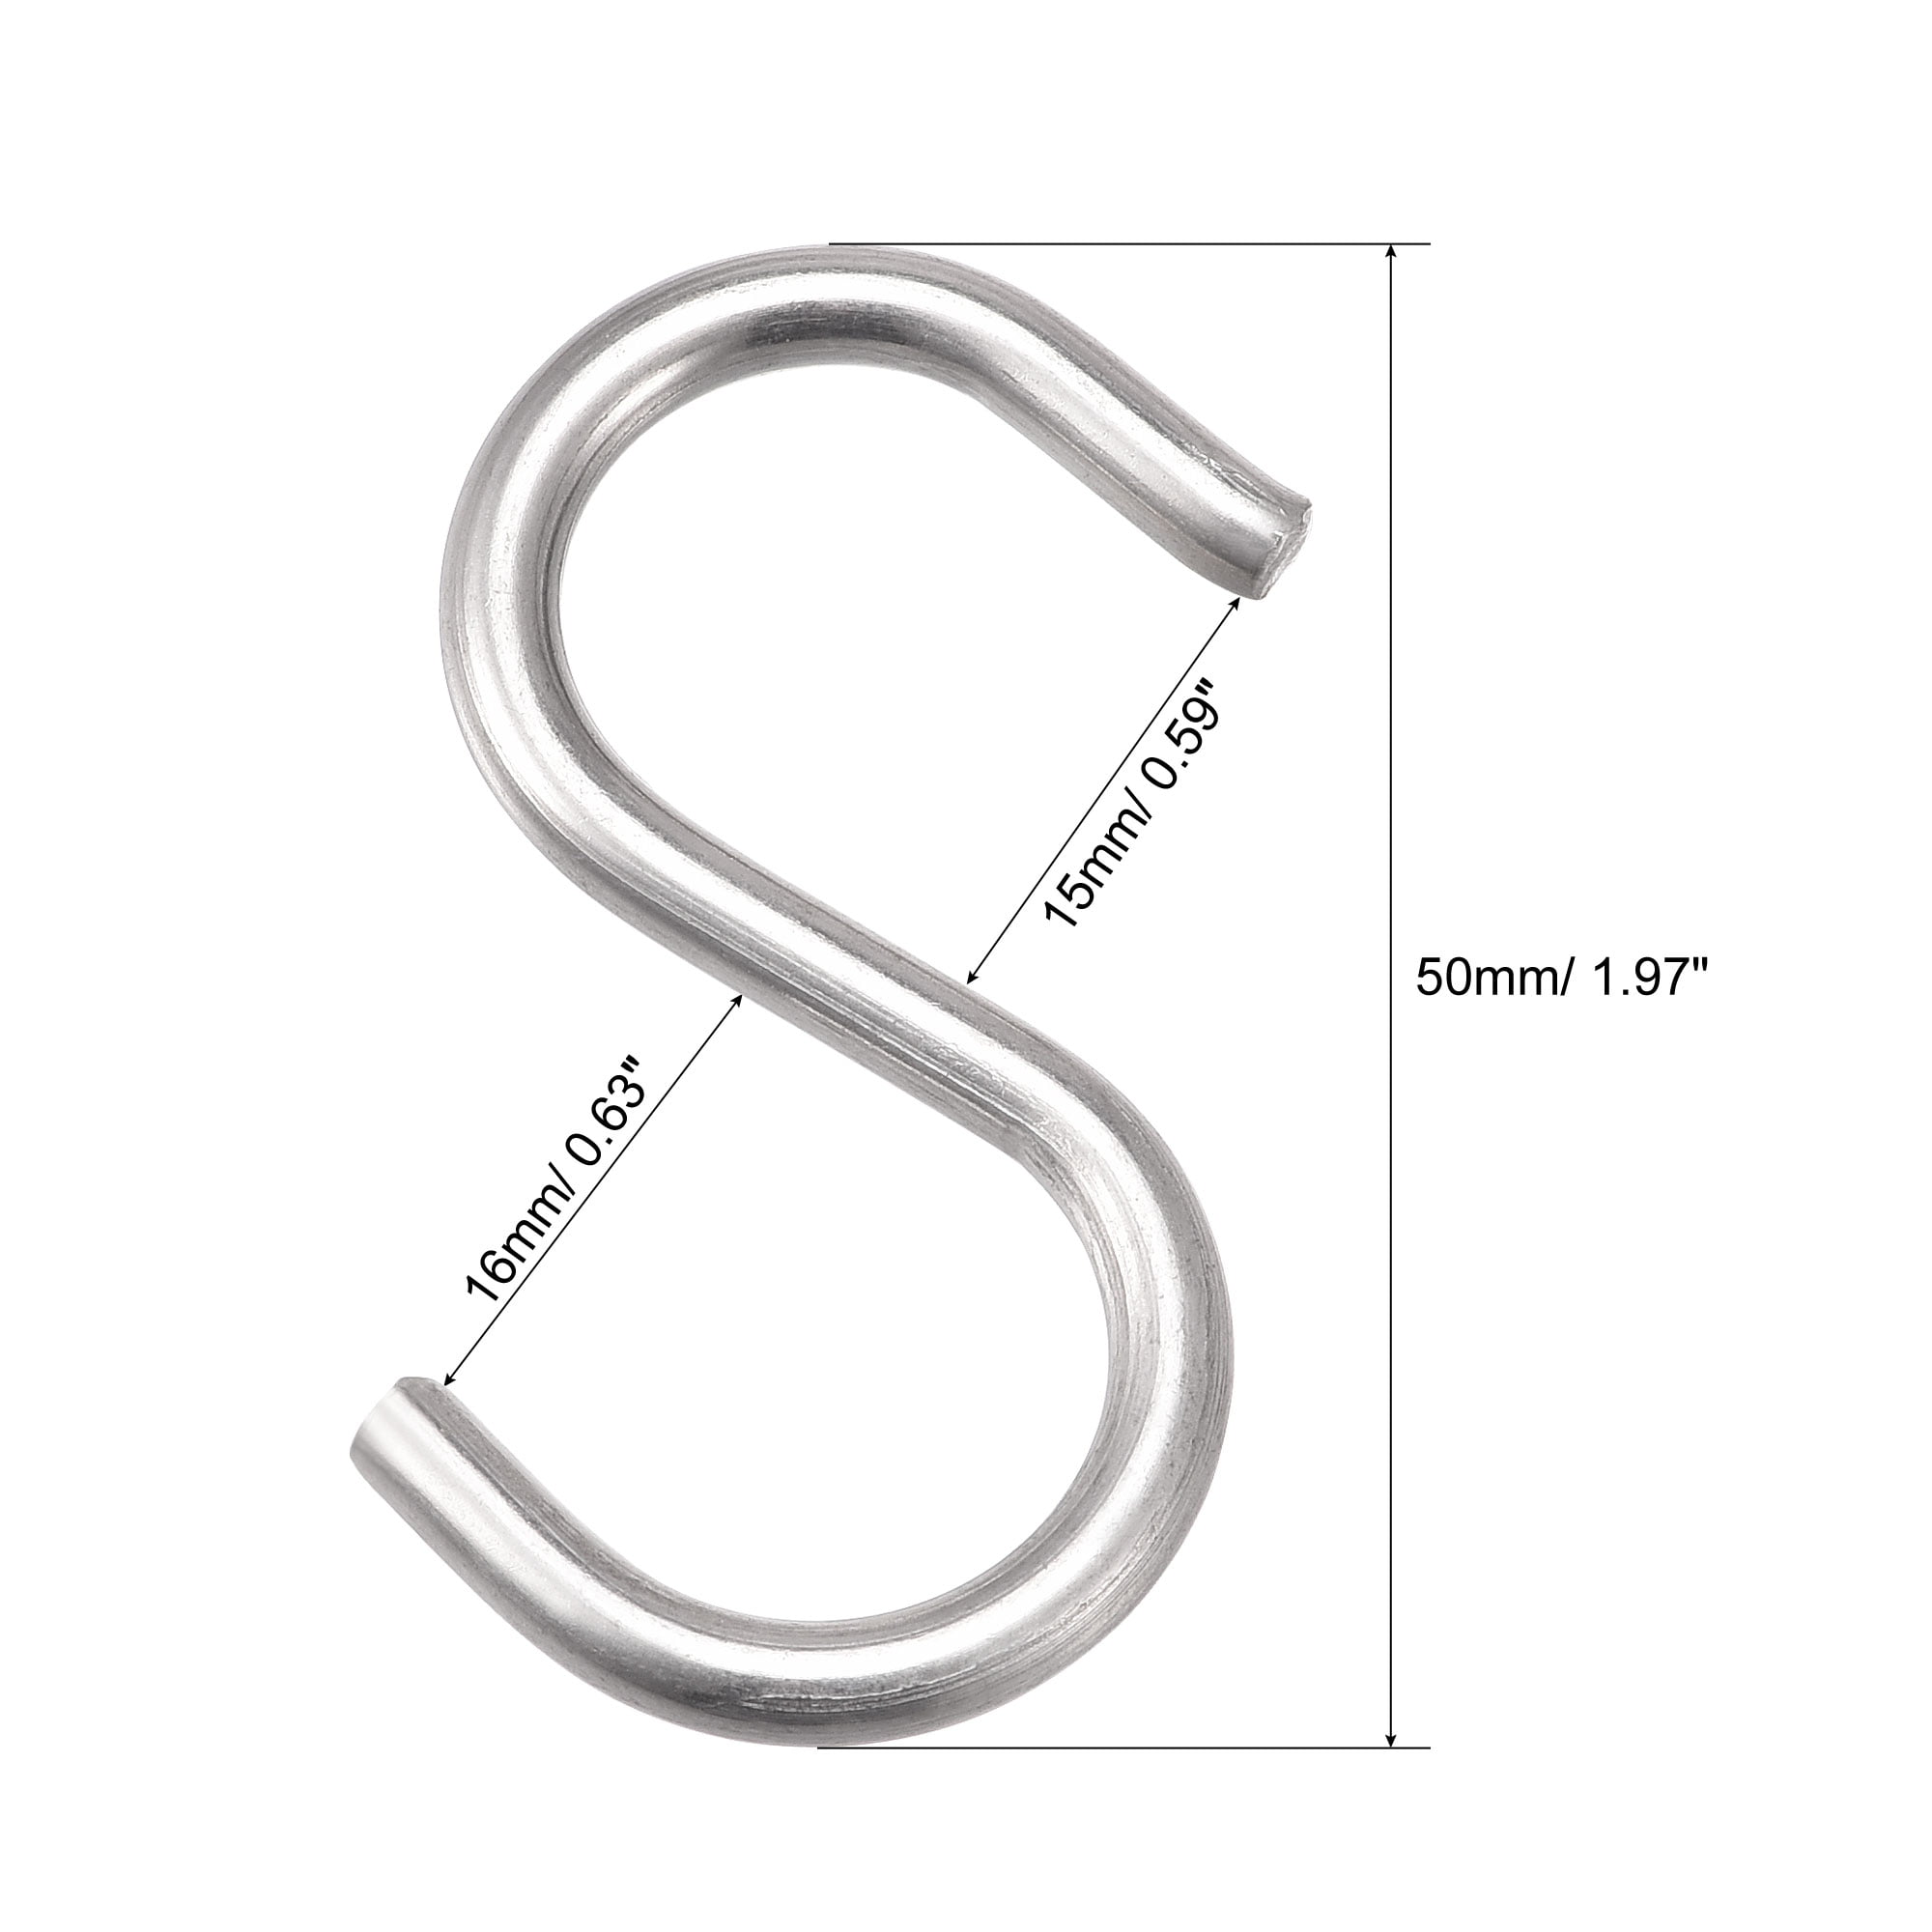 S Shaped Hooks for Hanging x10 50MM x 5MM Zinc Plated Steel